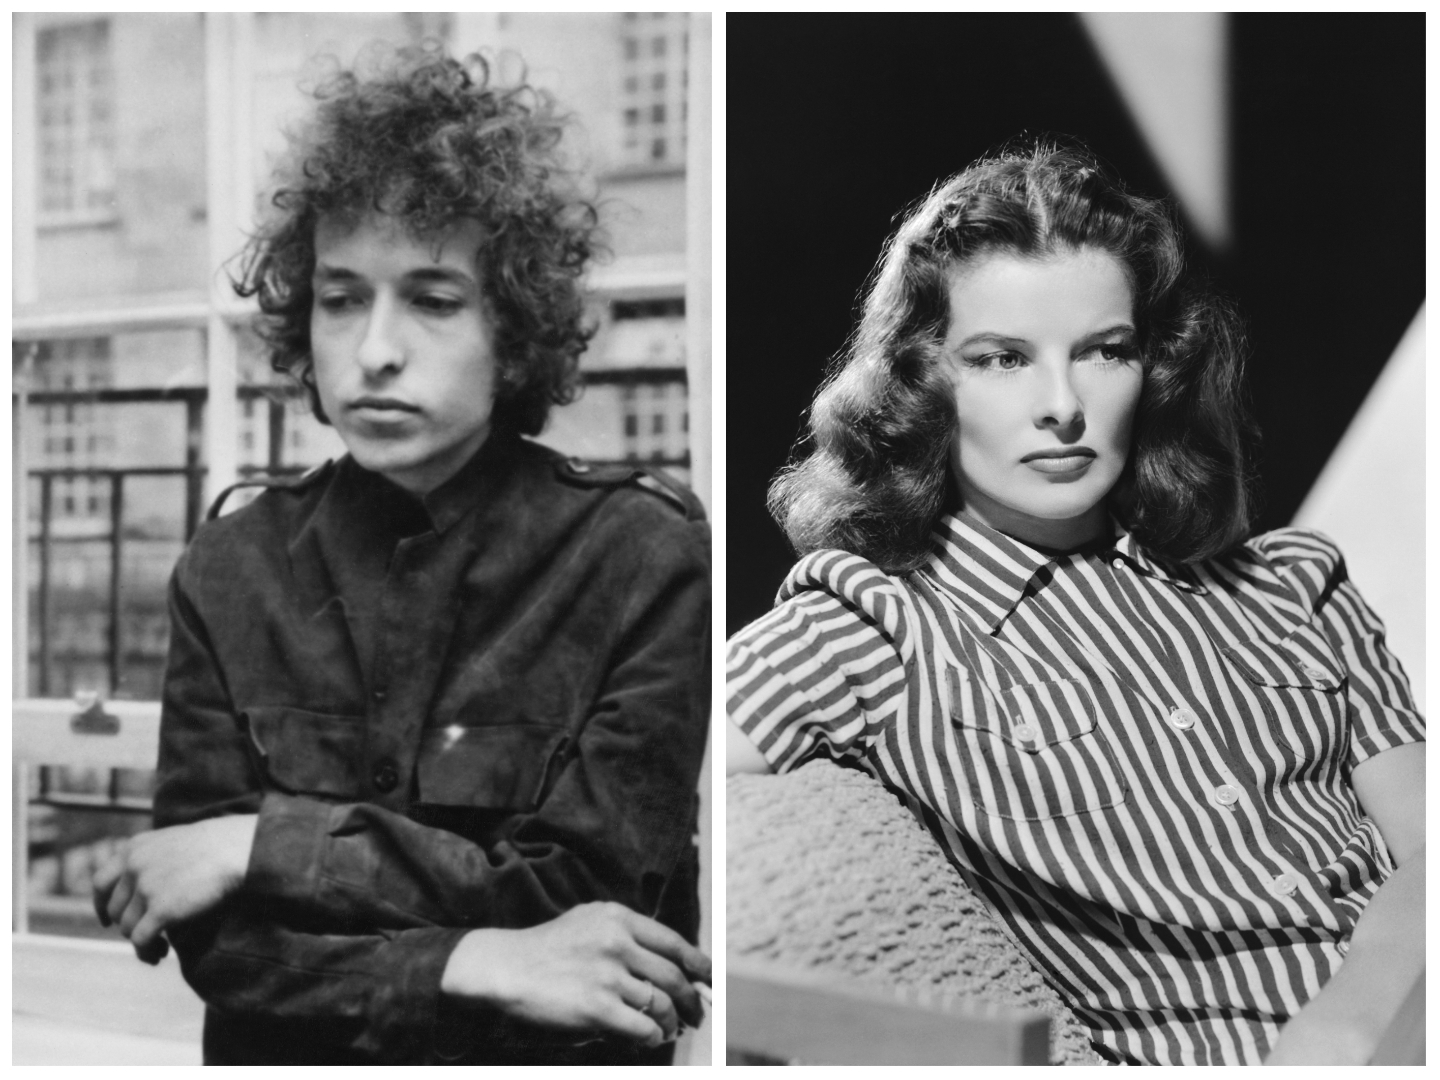 A black and white picture of Bob Dylan standing near a window. Katharine Hepburn sits on a couch.